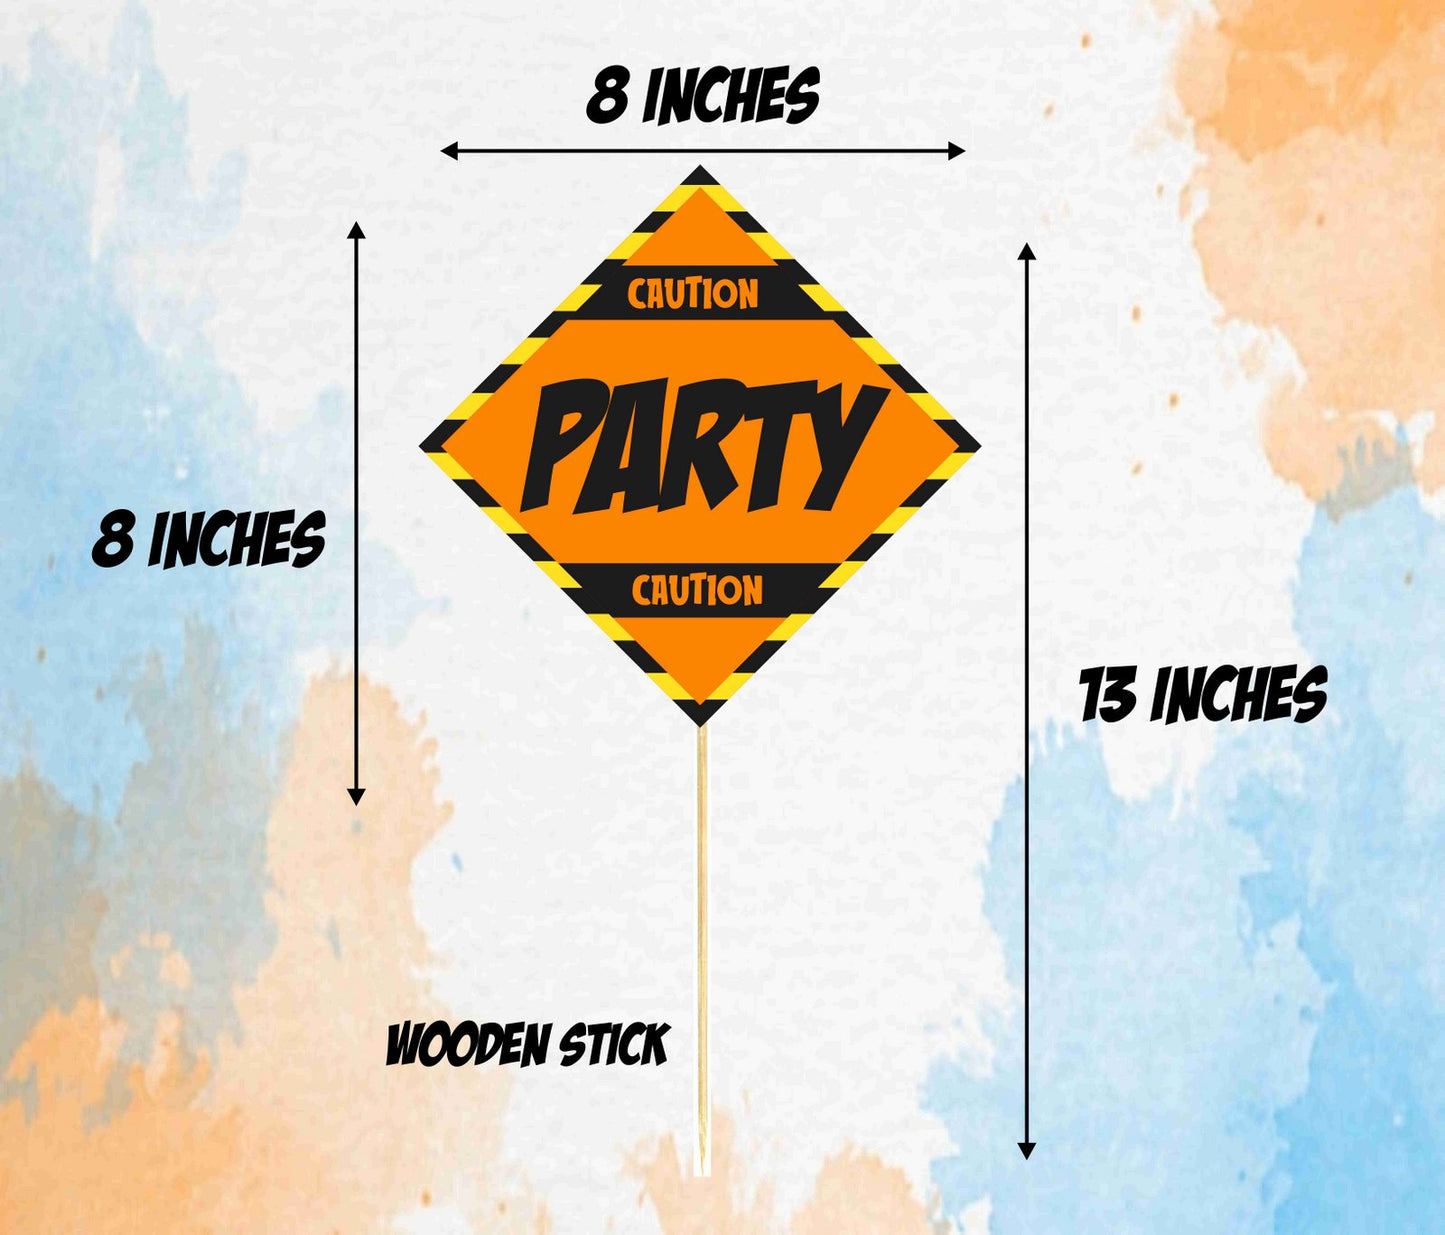 Construction Theme Birthday Photo Booth Party Props Theme Birthday Party Decoration, Birthday Photo Booth Party Item for Adults and Kids